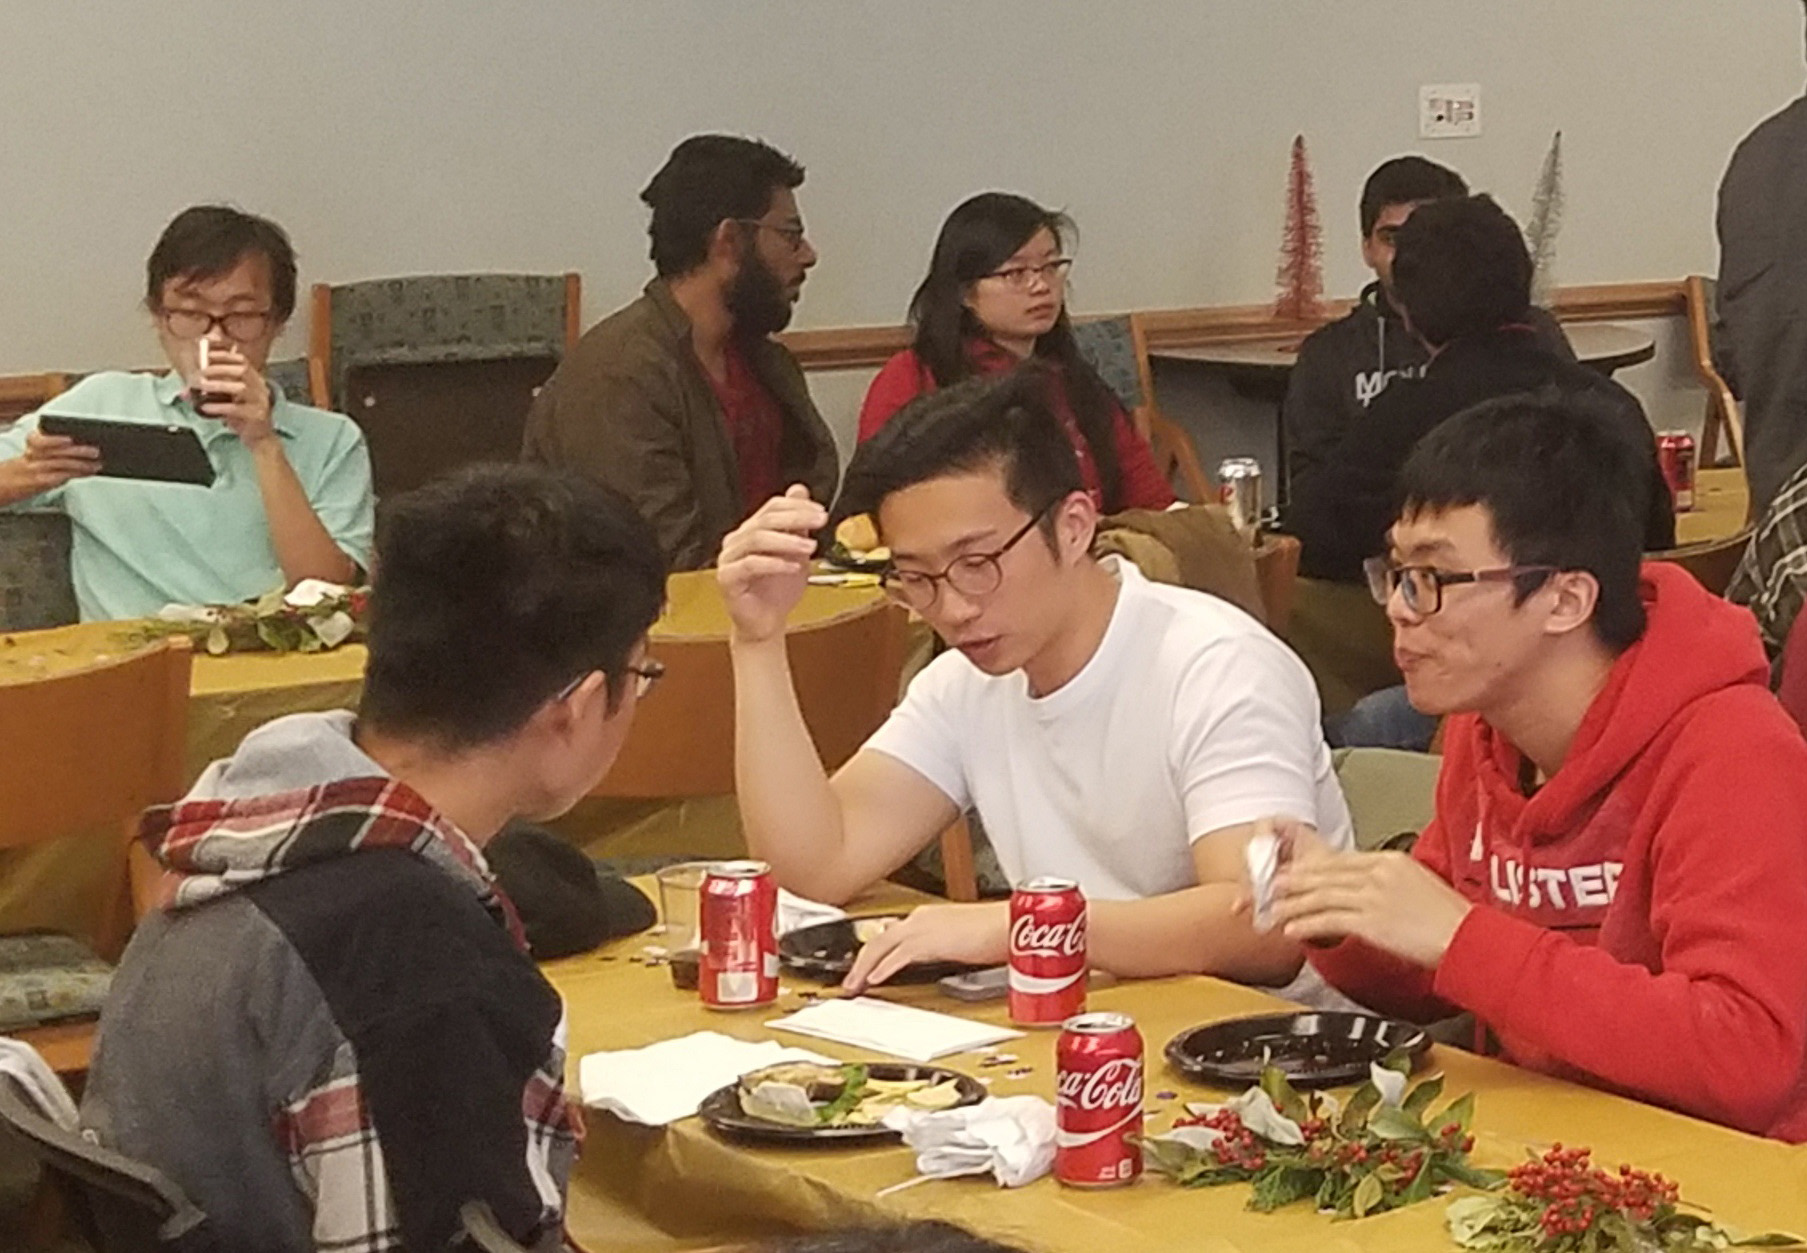 The Georgia Tech Police Department and ROTC programs hosted the first Student Holiday Dinner for those on campus during winter break in 2016.